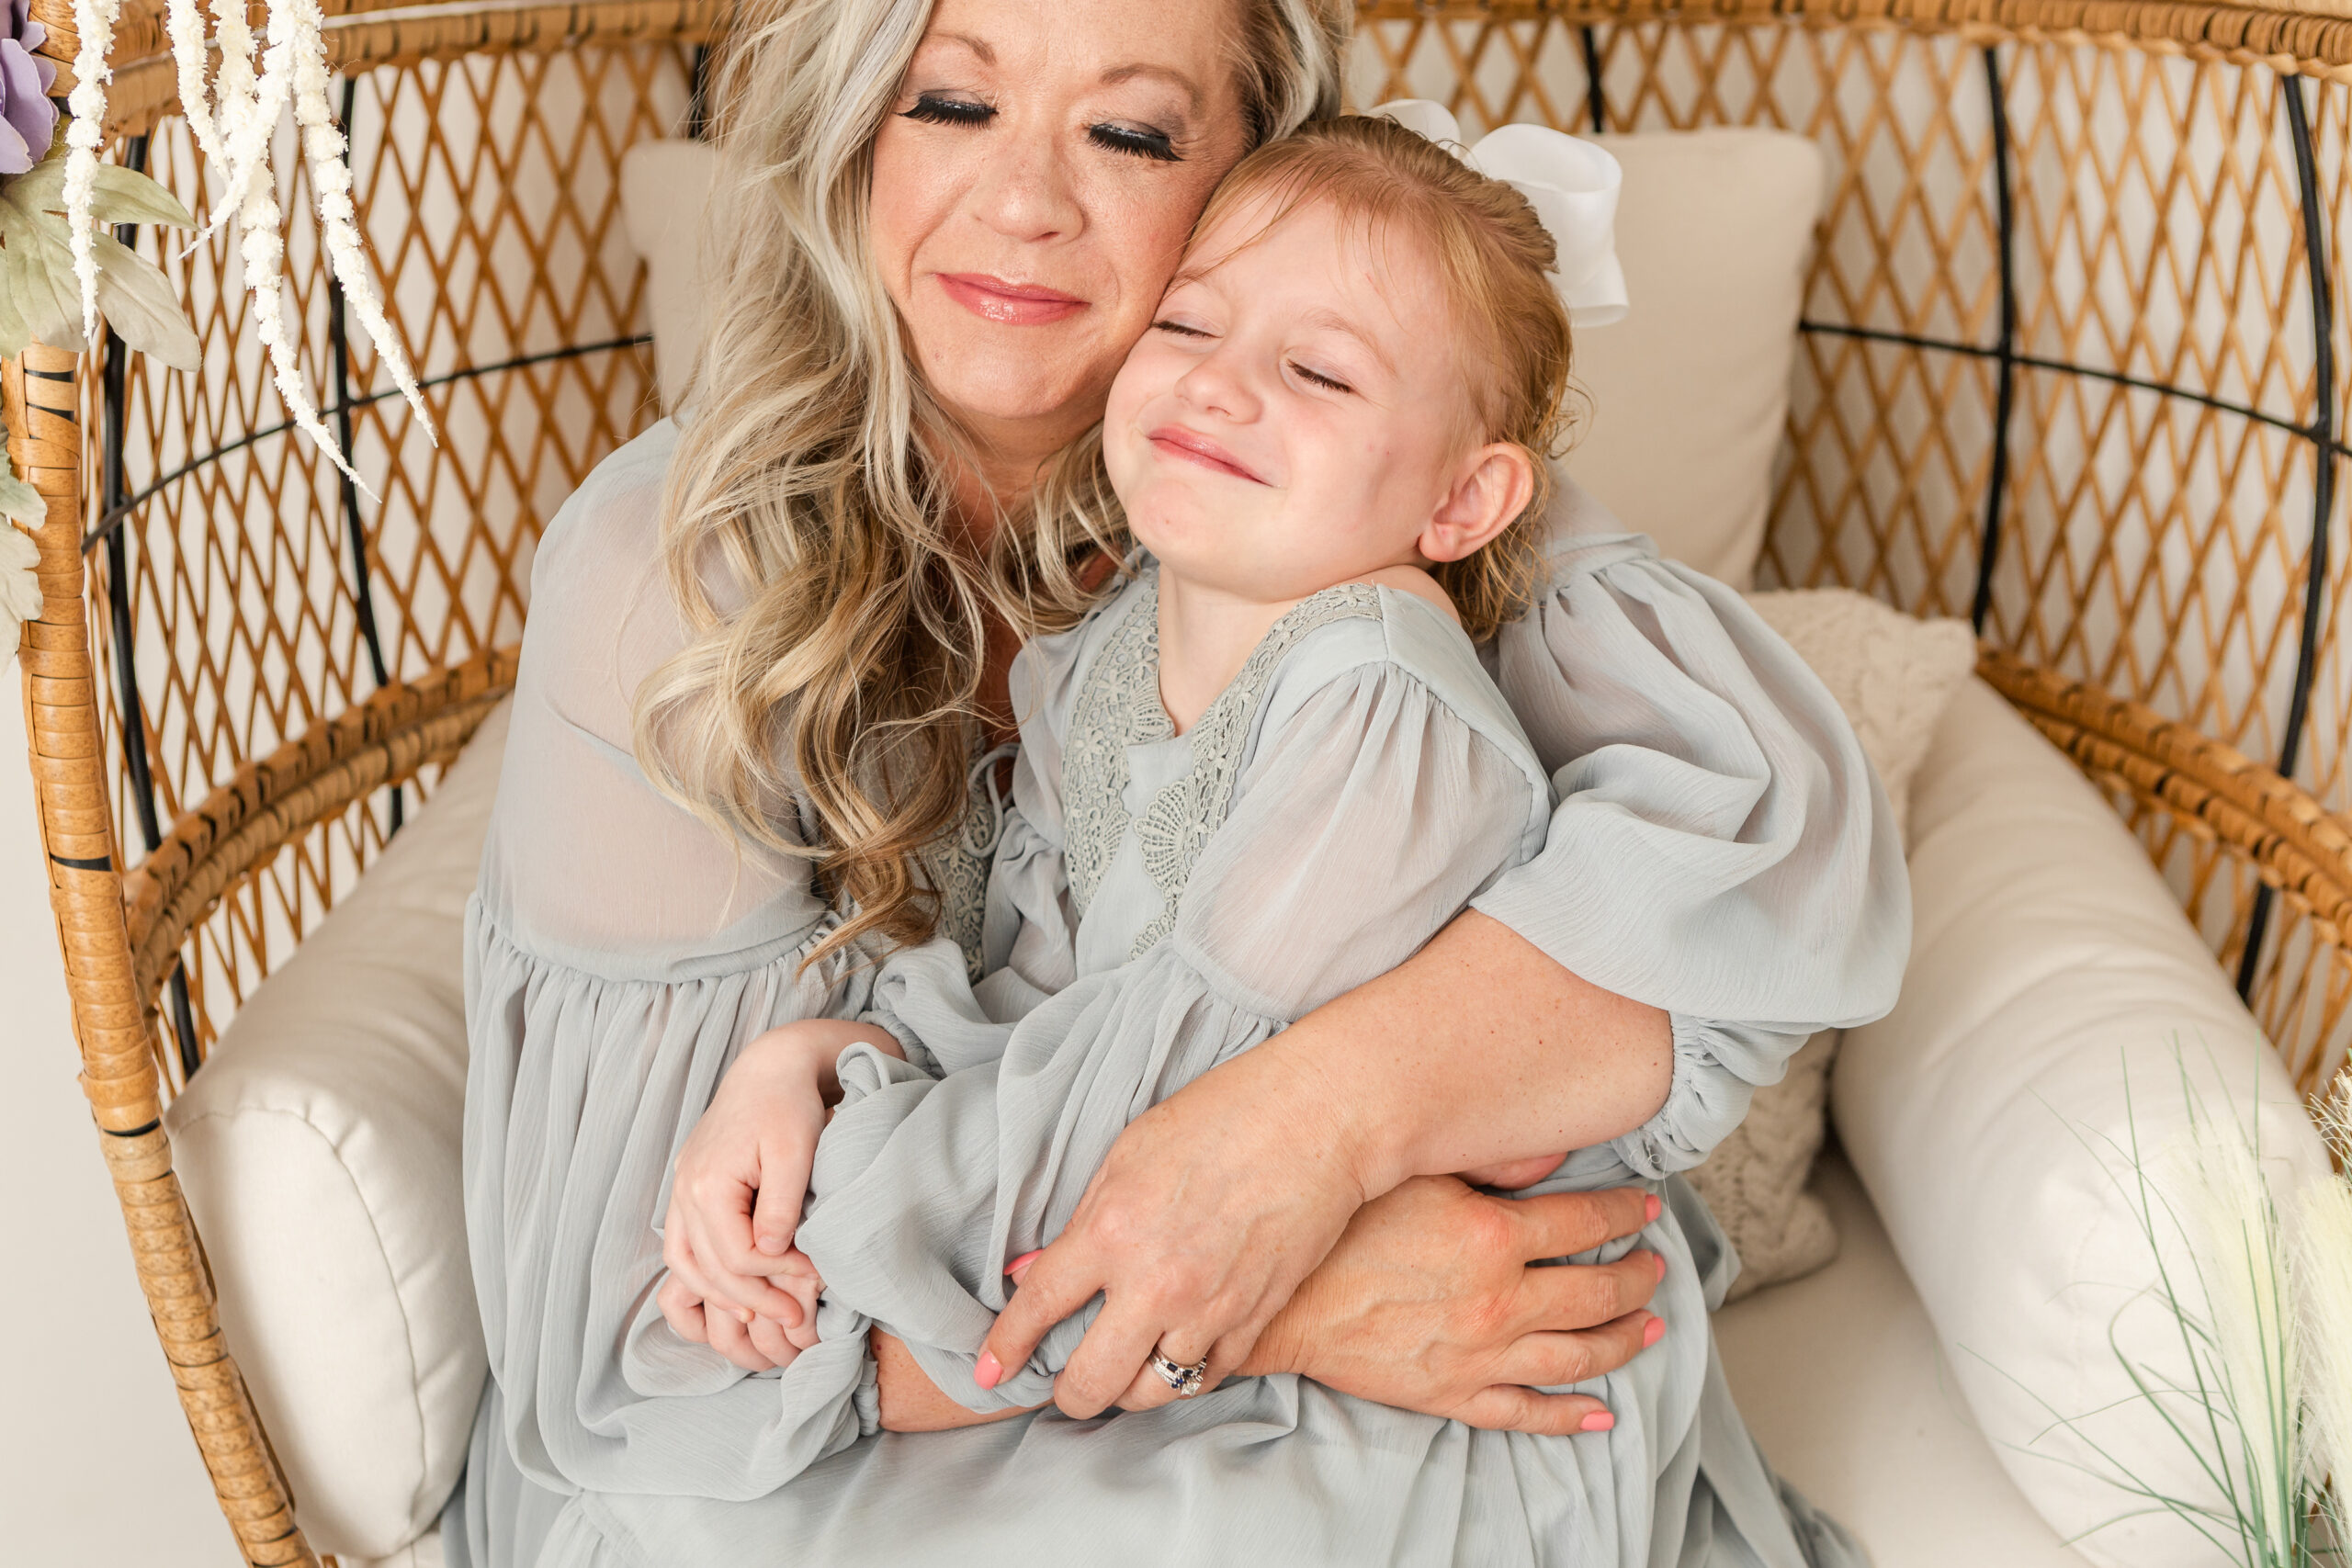 mom and daughter wearing matching dresses snuggling in a floral chair